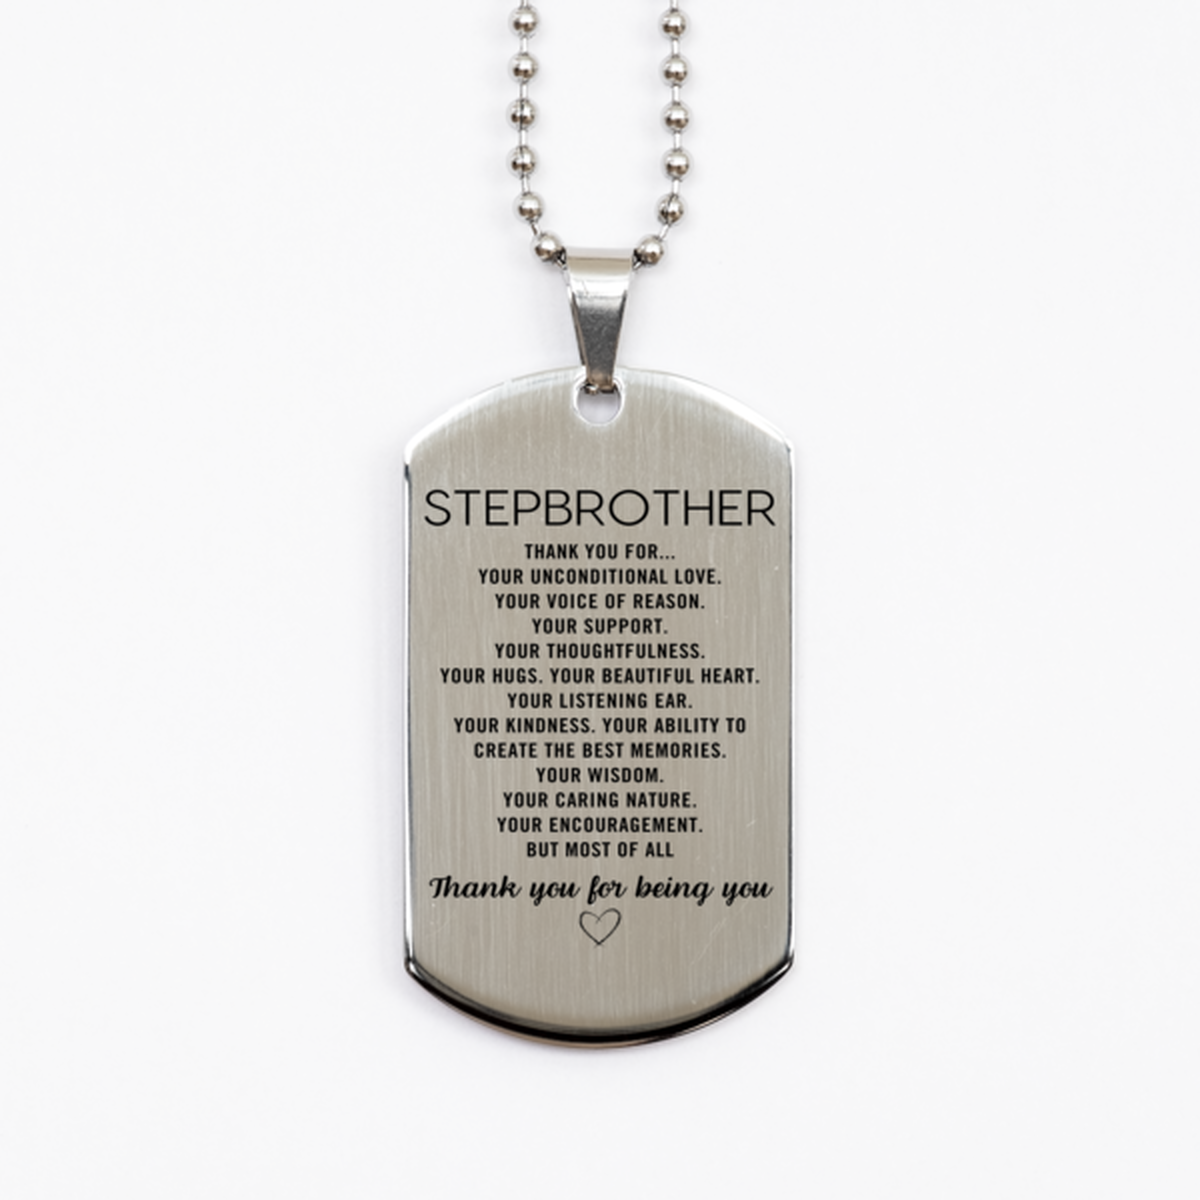 Stepbrother Silver Dog Tag Custom, Engraved Gifts For Stepbrother Christmas Graduation Birthday Gifts for Men Women Stepbrother Thank you for Your unconditional love